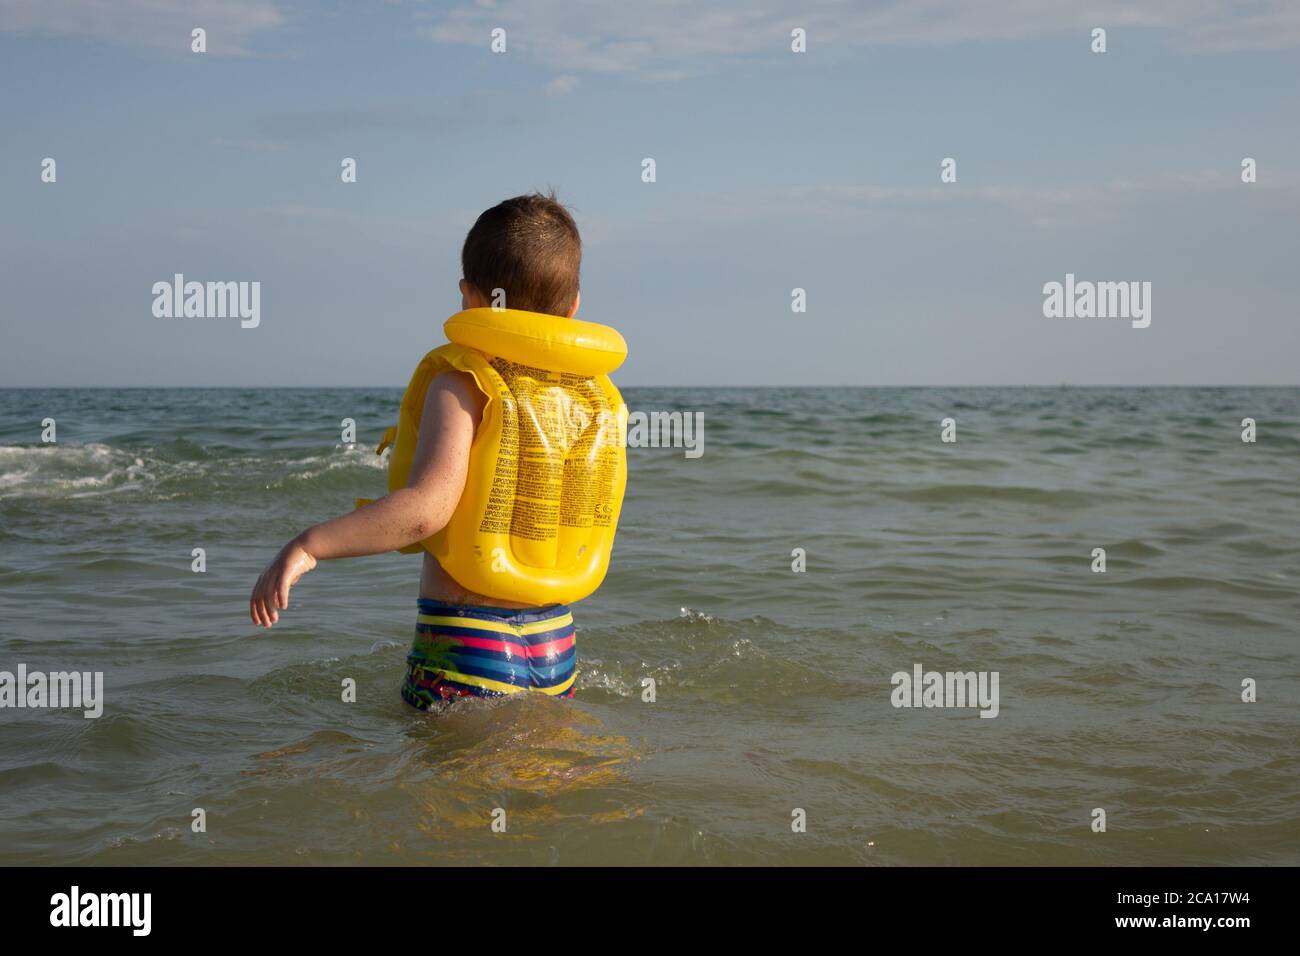 A 5-year-old boy in a yellow life jacket and rainbow-colored shorts enters the sea. Stock Photo